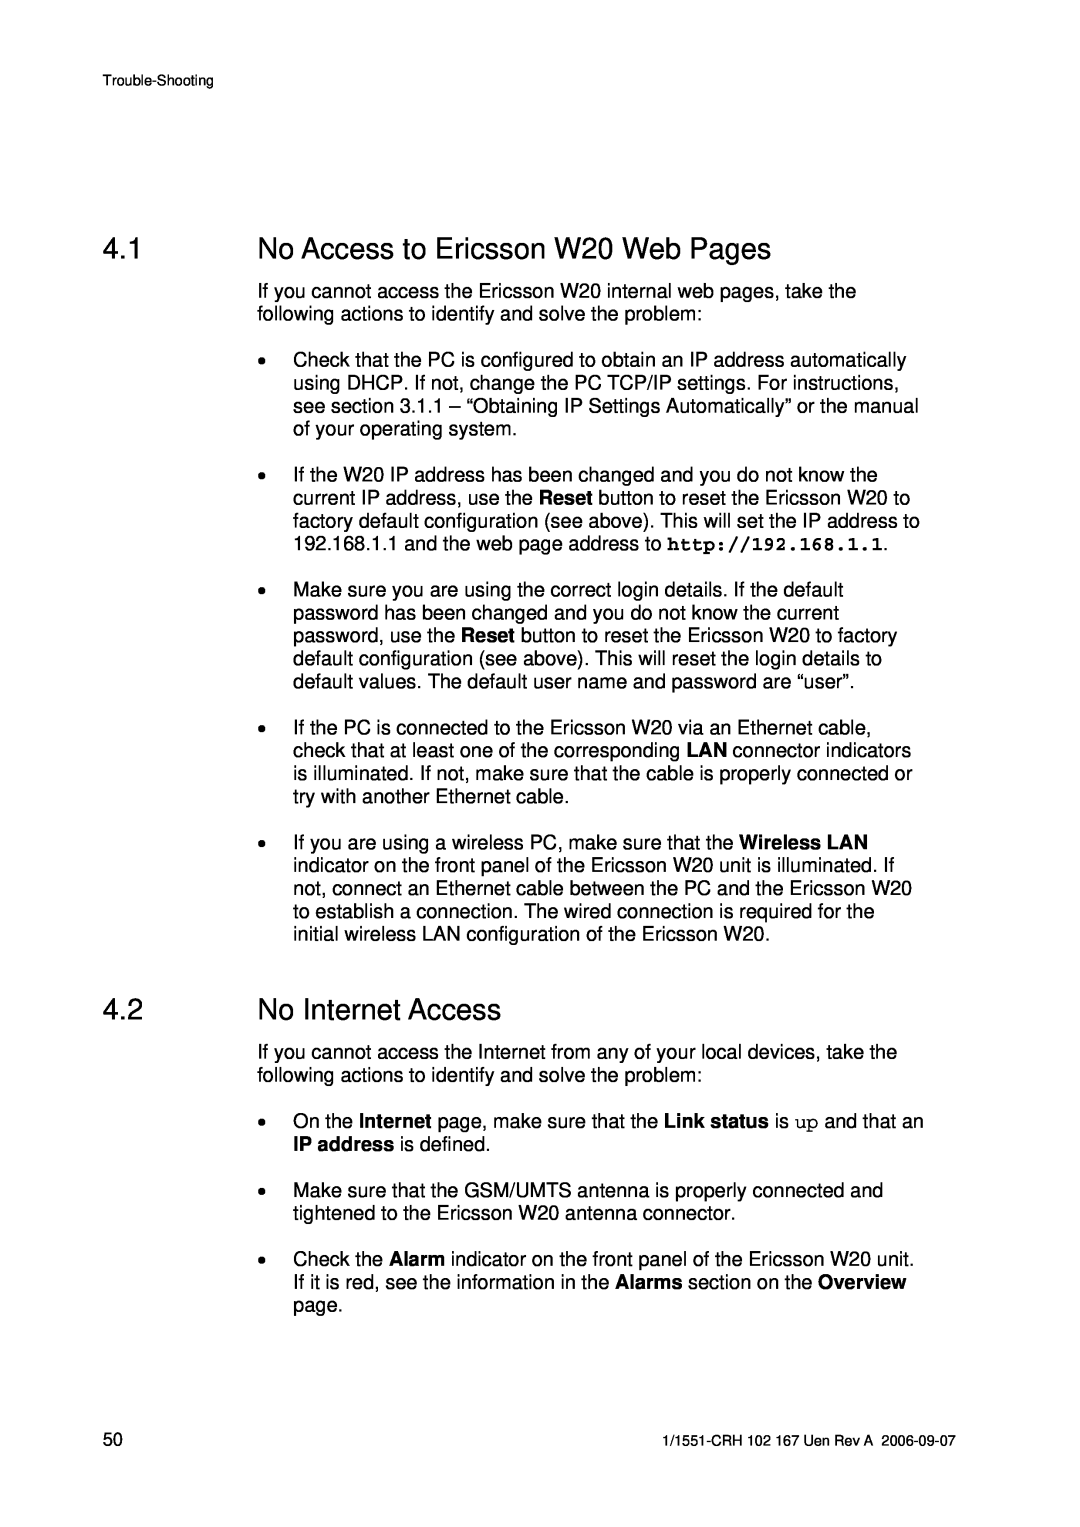 Ericsson manual No Access to Ericsson W20 Web Pages, No Internet Access 